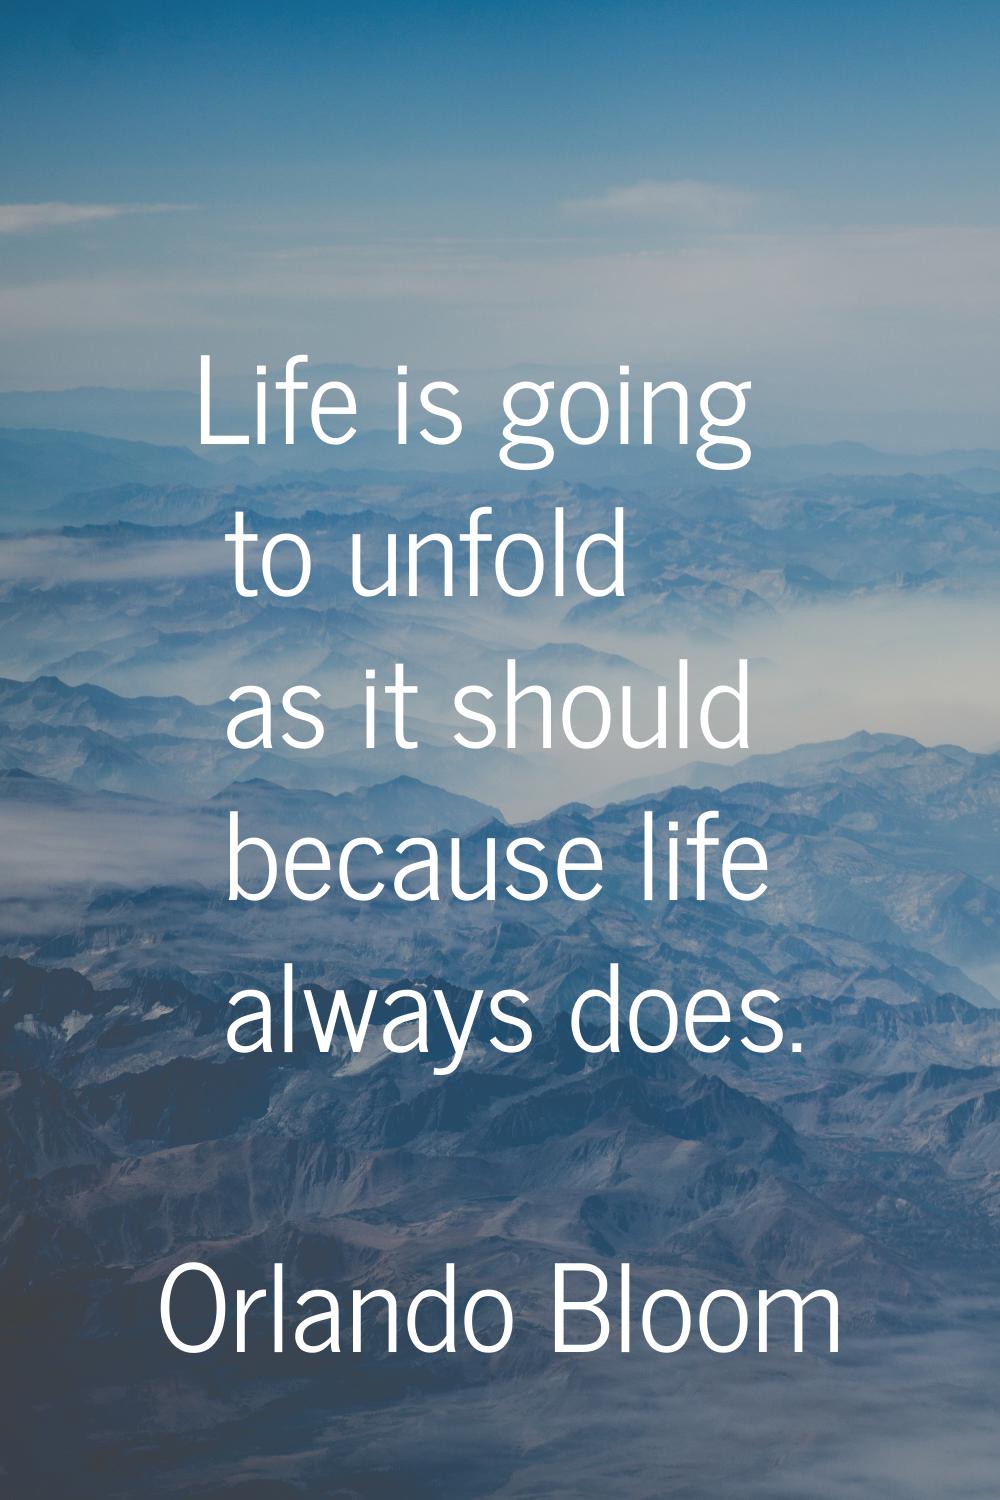 Life is going to unfold as it should because life always does.